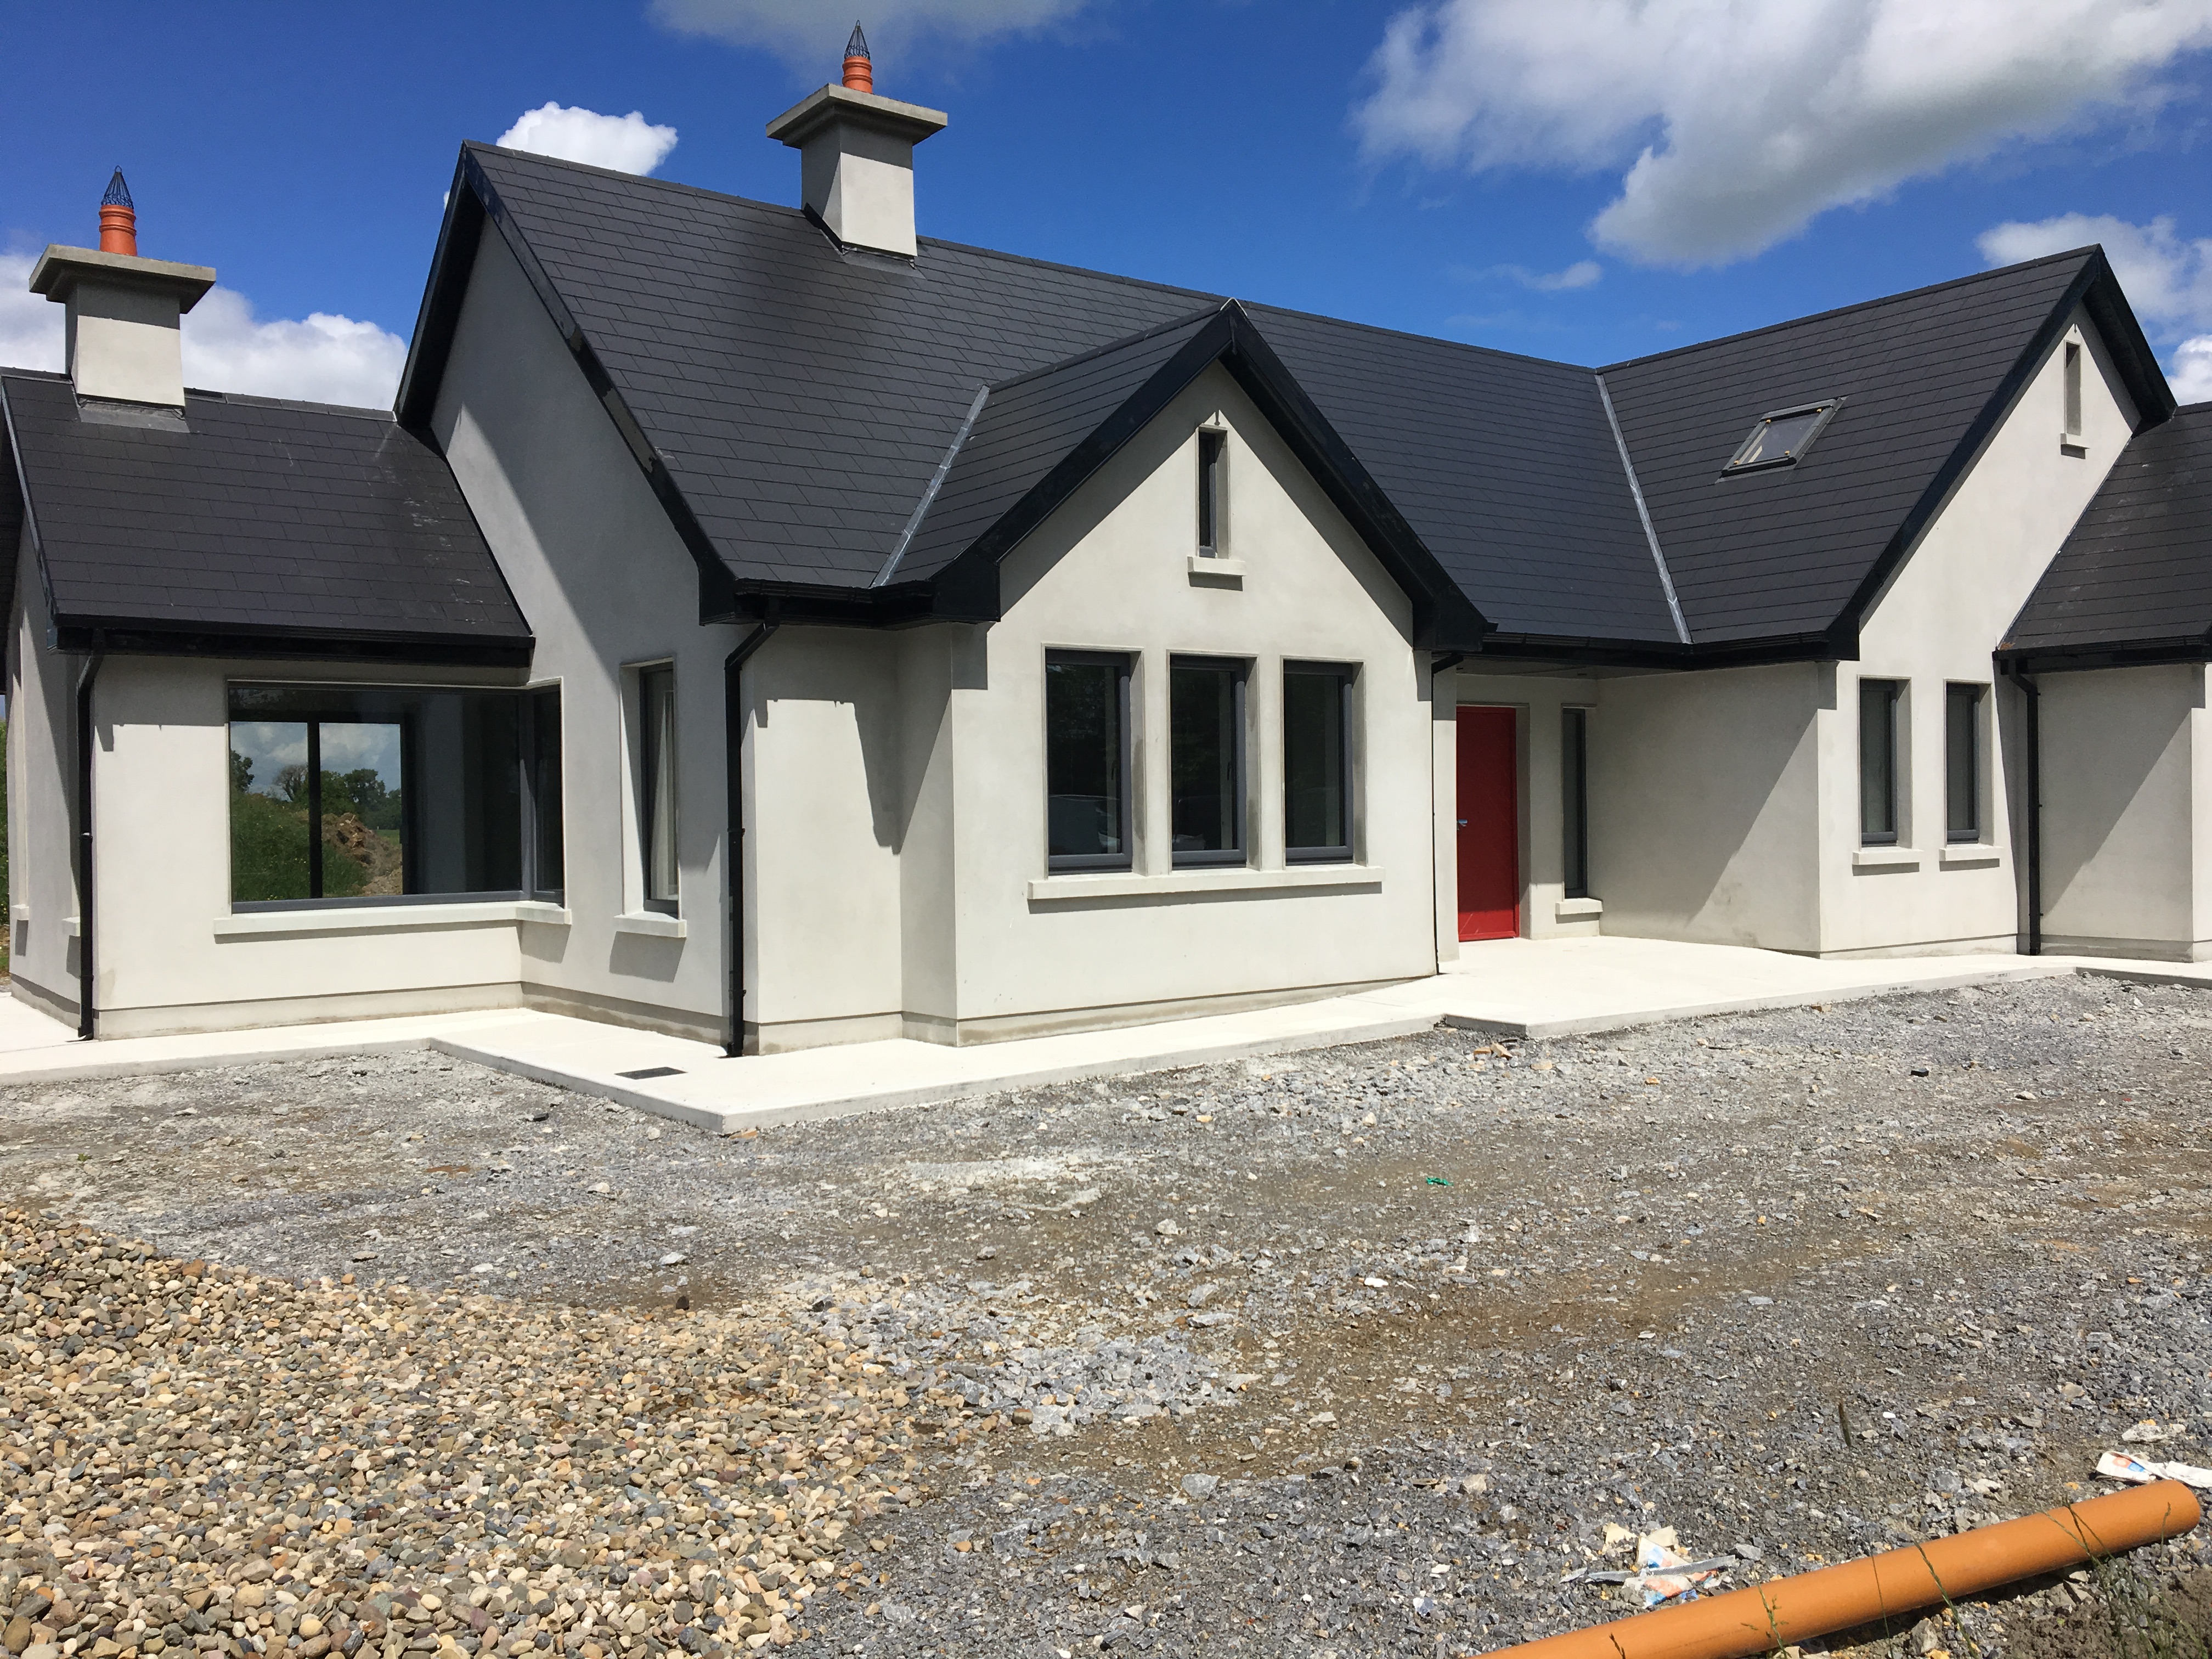 MH Construction | Newly built house in Croom Co. Limerick